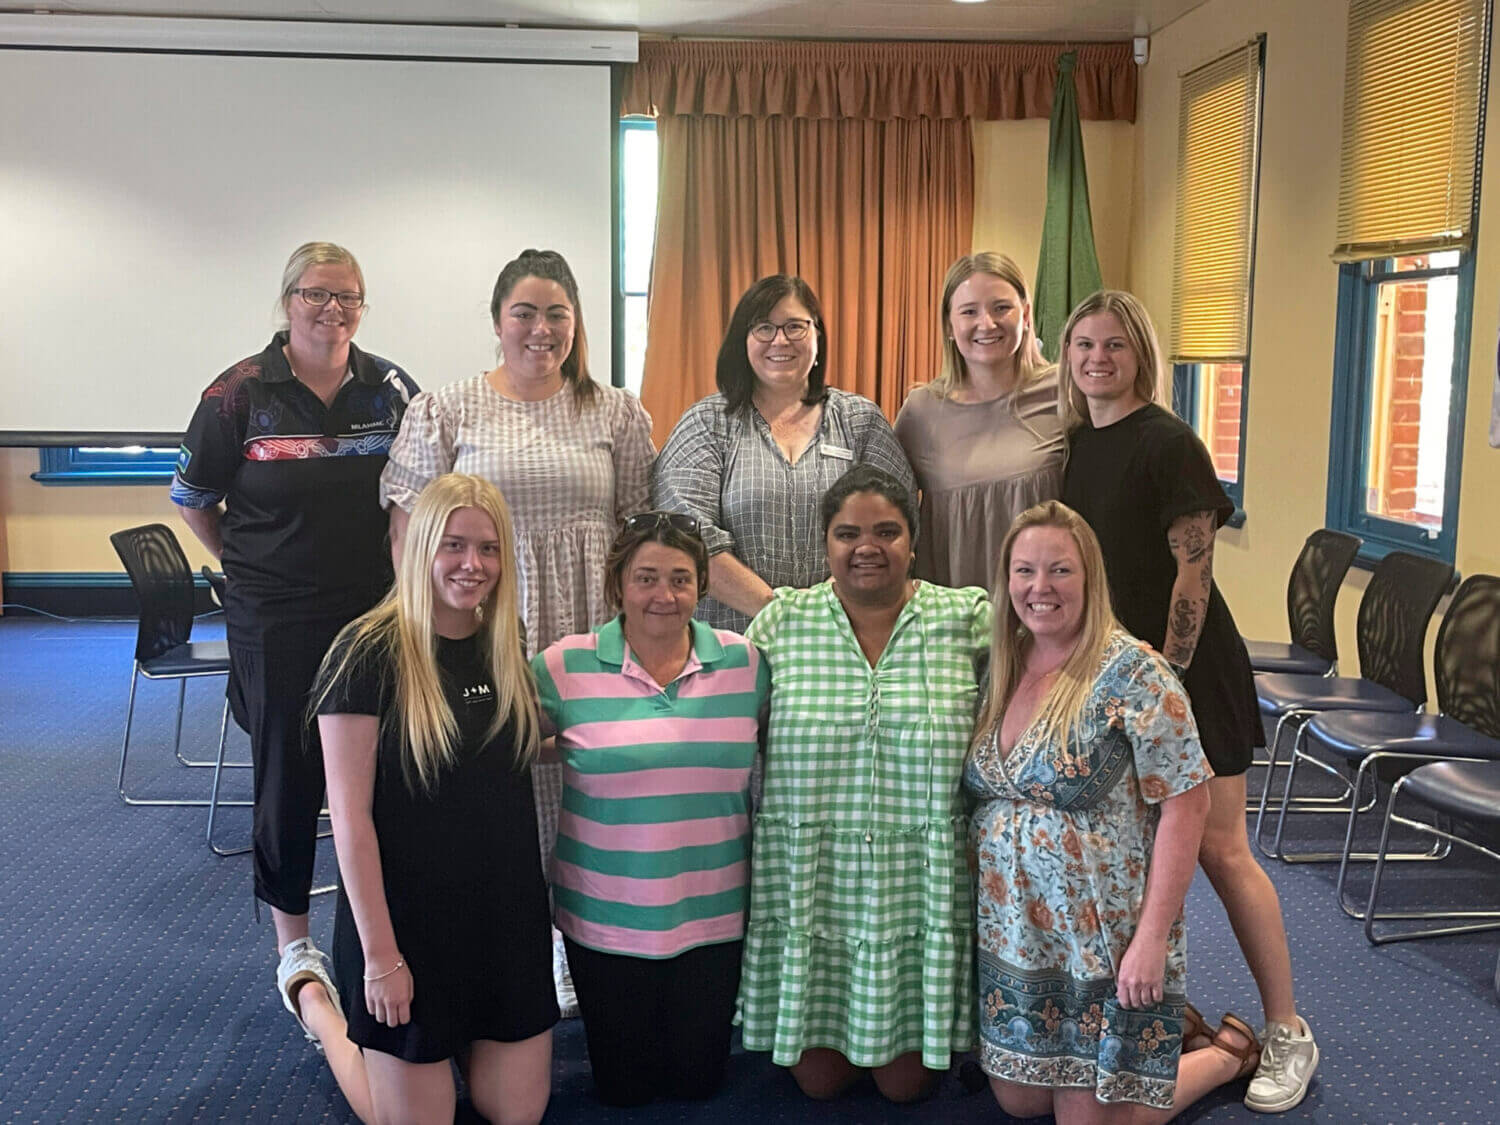 Trainee teachers of the Catholic Education Wilcannia-Forbes Teaching Schools Hub include (back row) Rachel Toomey, Ashley Place, Paula Leadbitter - Head of Learning and Teaching with Catholic Education Wilcannia-Forbes (CEWF), Laura Kirk, and Tiffani Townsend; together with (front row) Macy Lloyd, Olivia Dauth, Bridgette Larry (St Joseph’s Parish School Condobolin), and Janelle Thompson. Image Contributed.